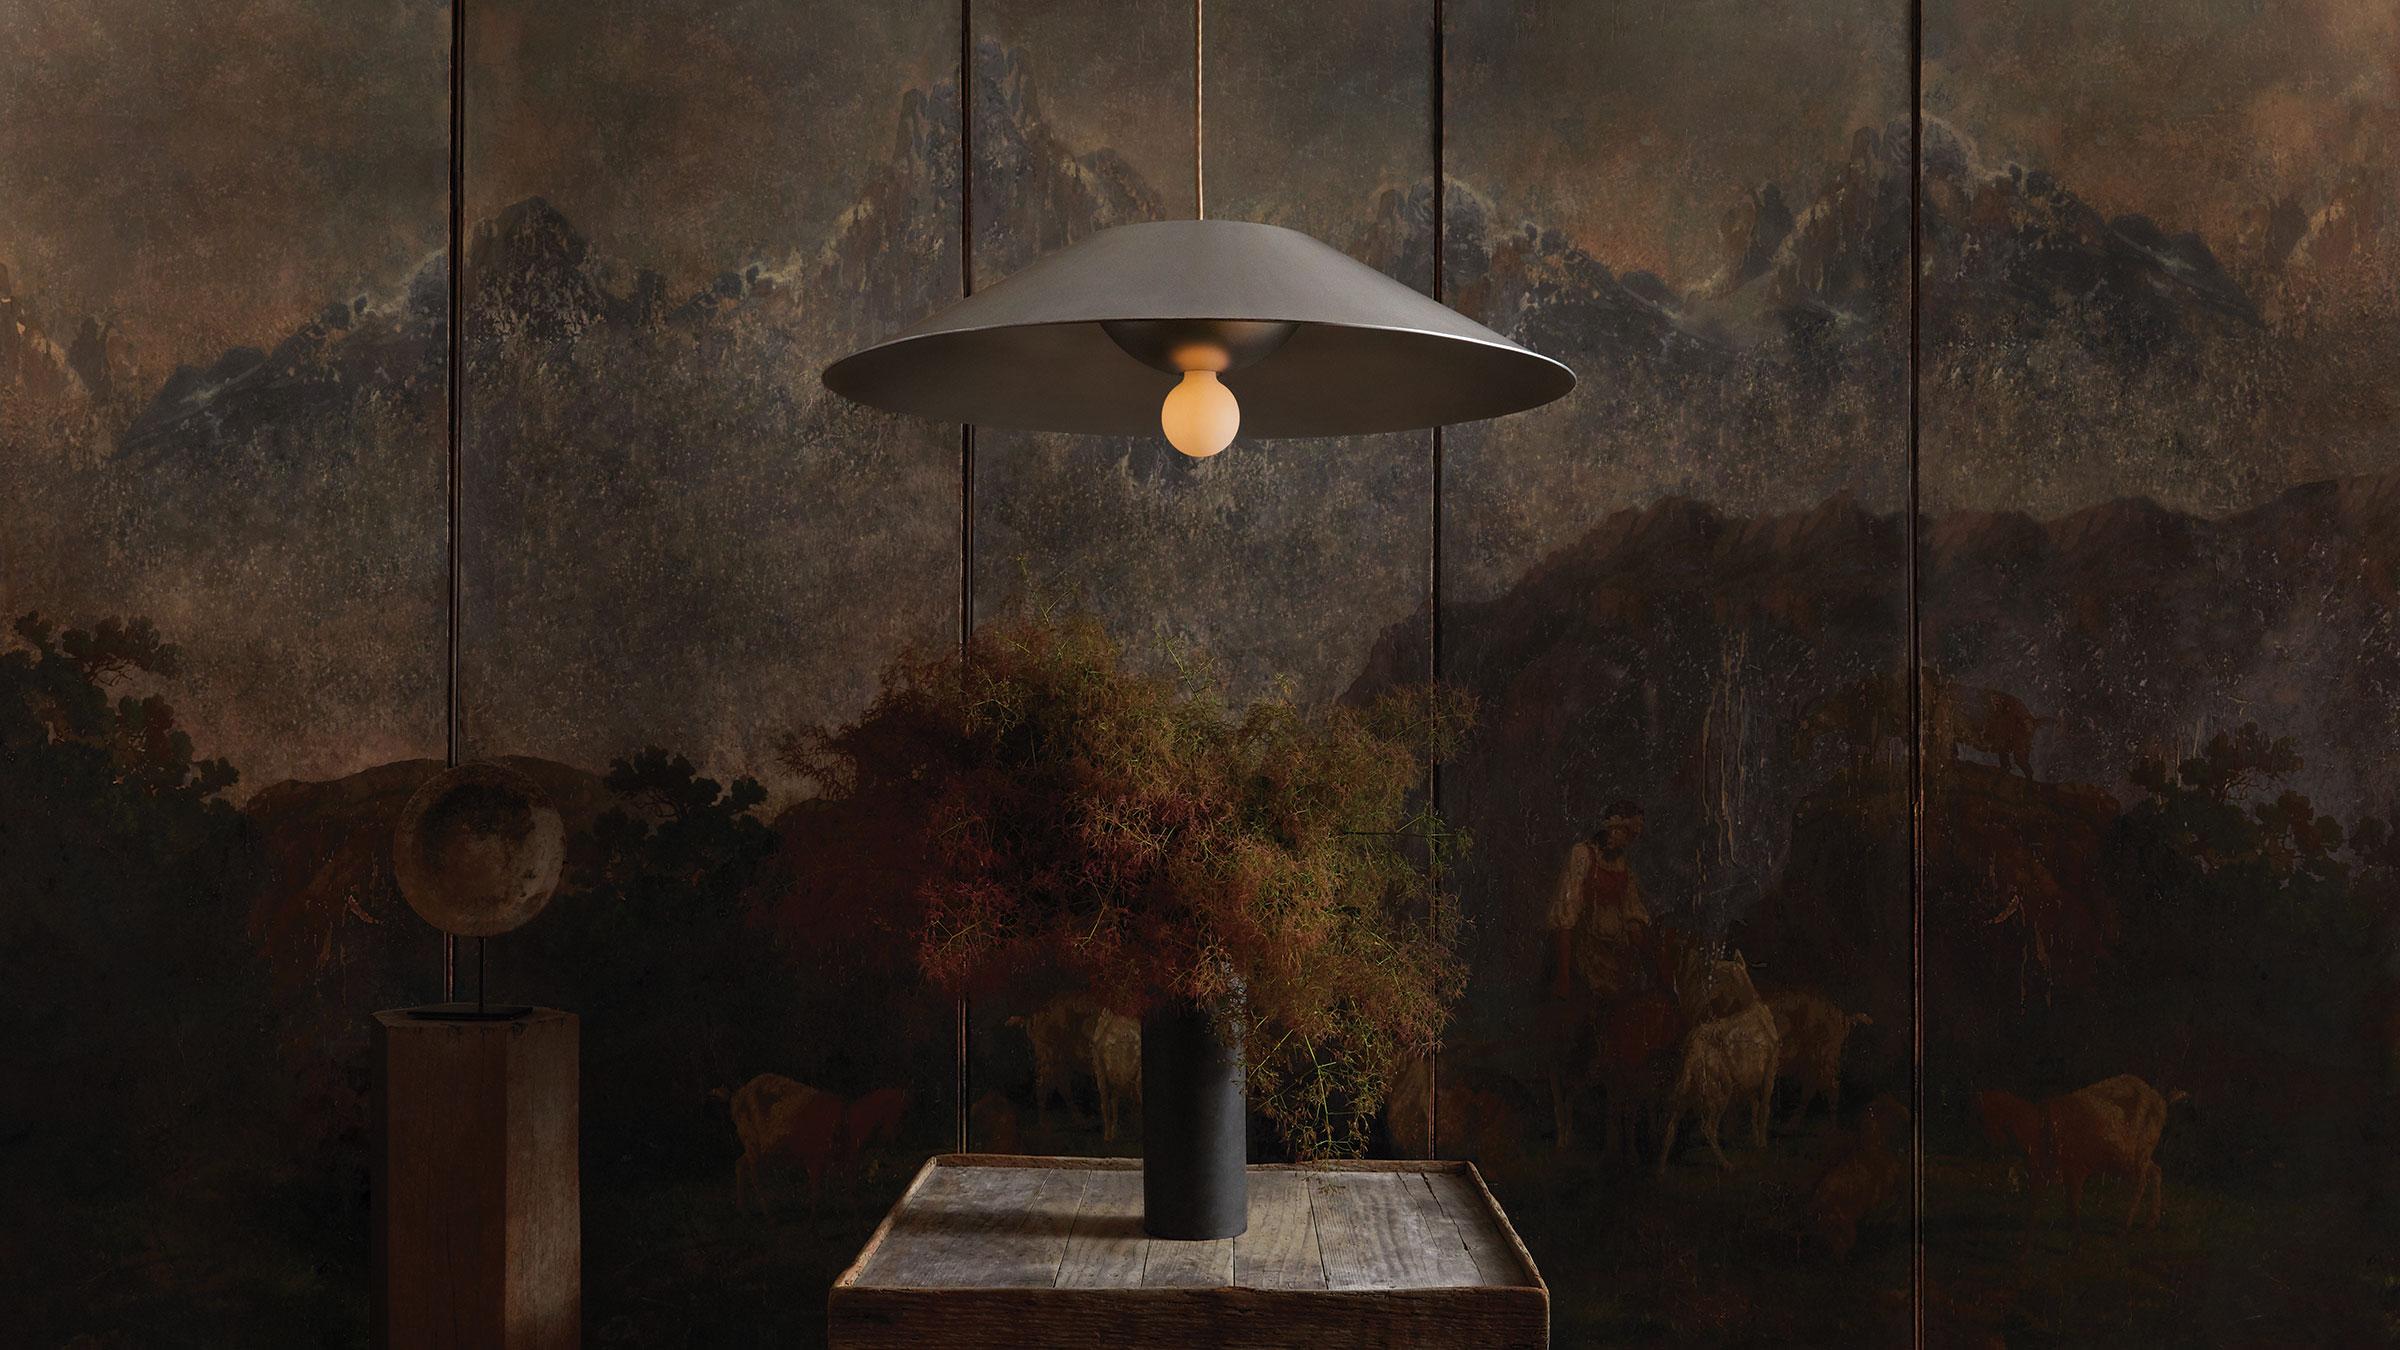 Monumental Pendant Large is our largest single-spun fixture to date, incorporating an impressively scaled canted surface surrounding a sculptural hemisphere. The fixture creates a uniform material world in subtly cool reflective waxed aluminum. This